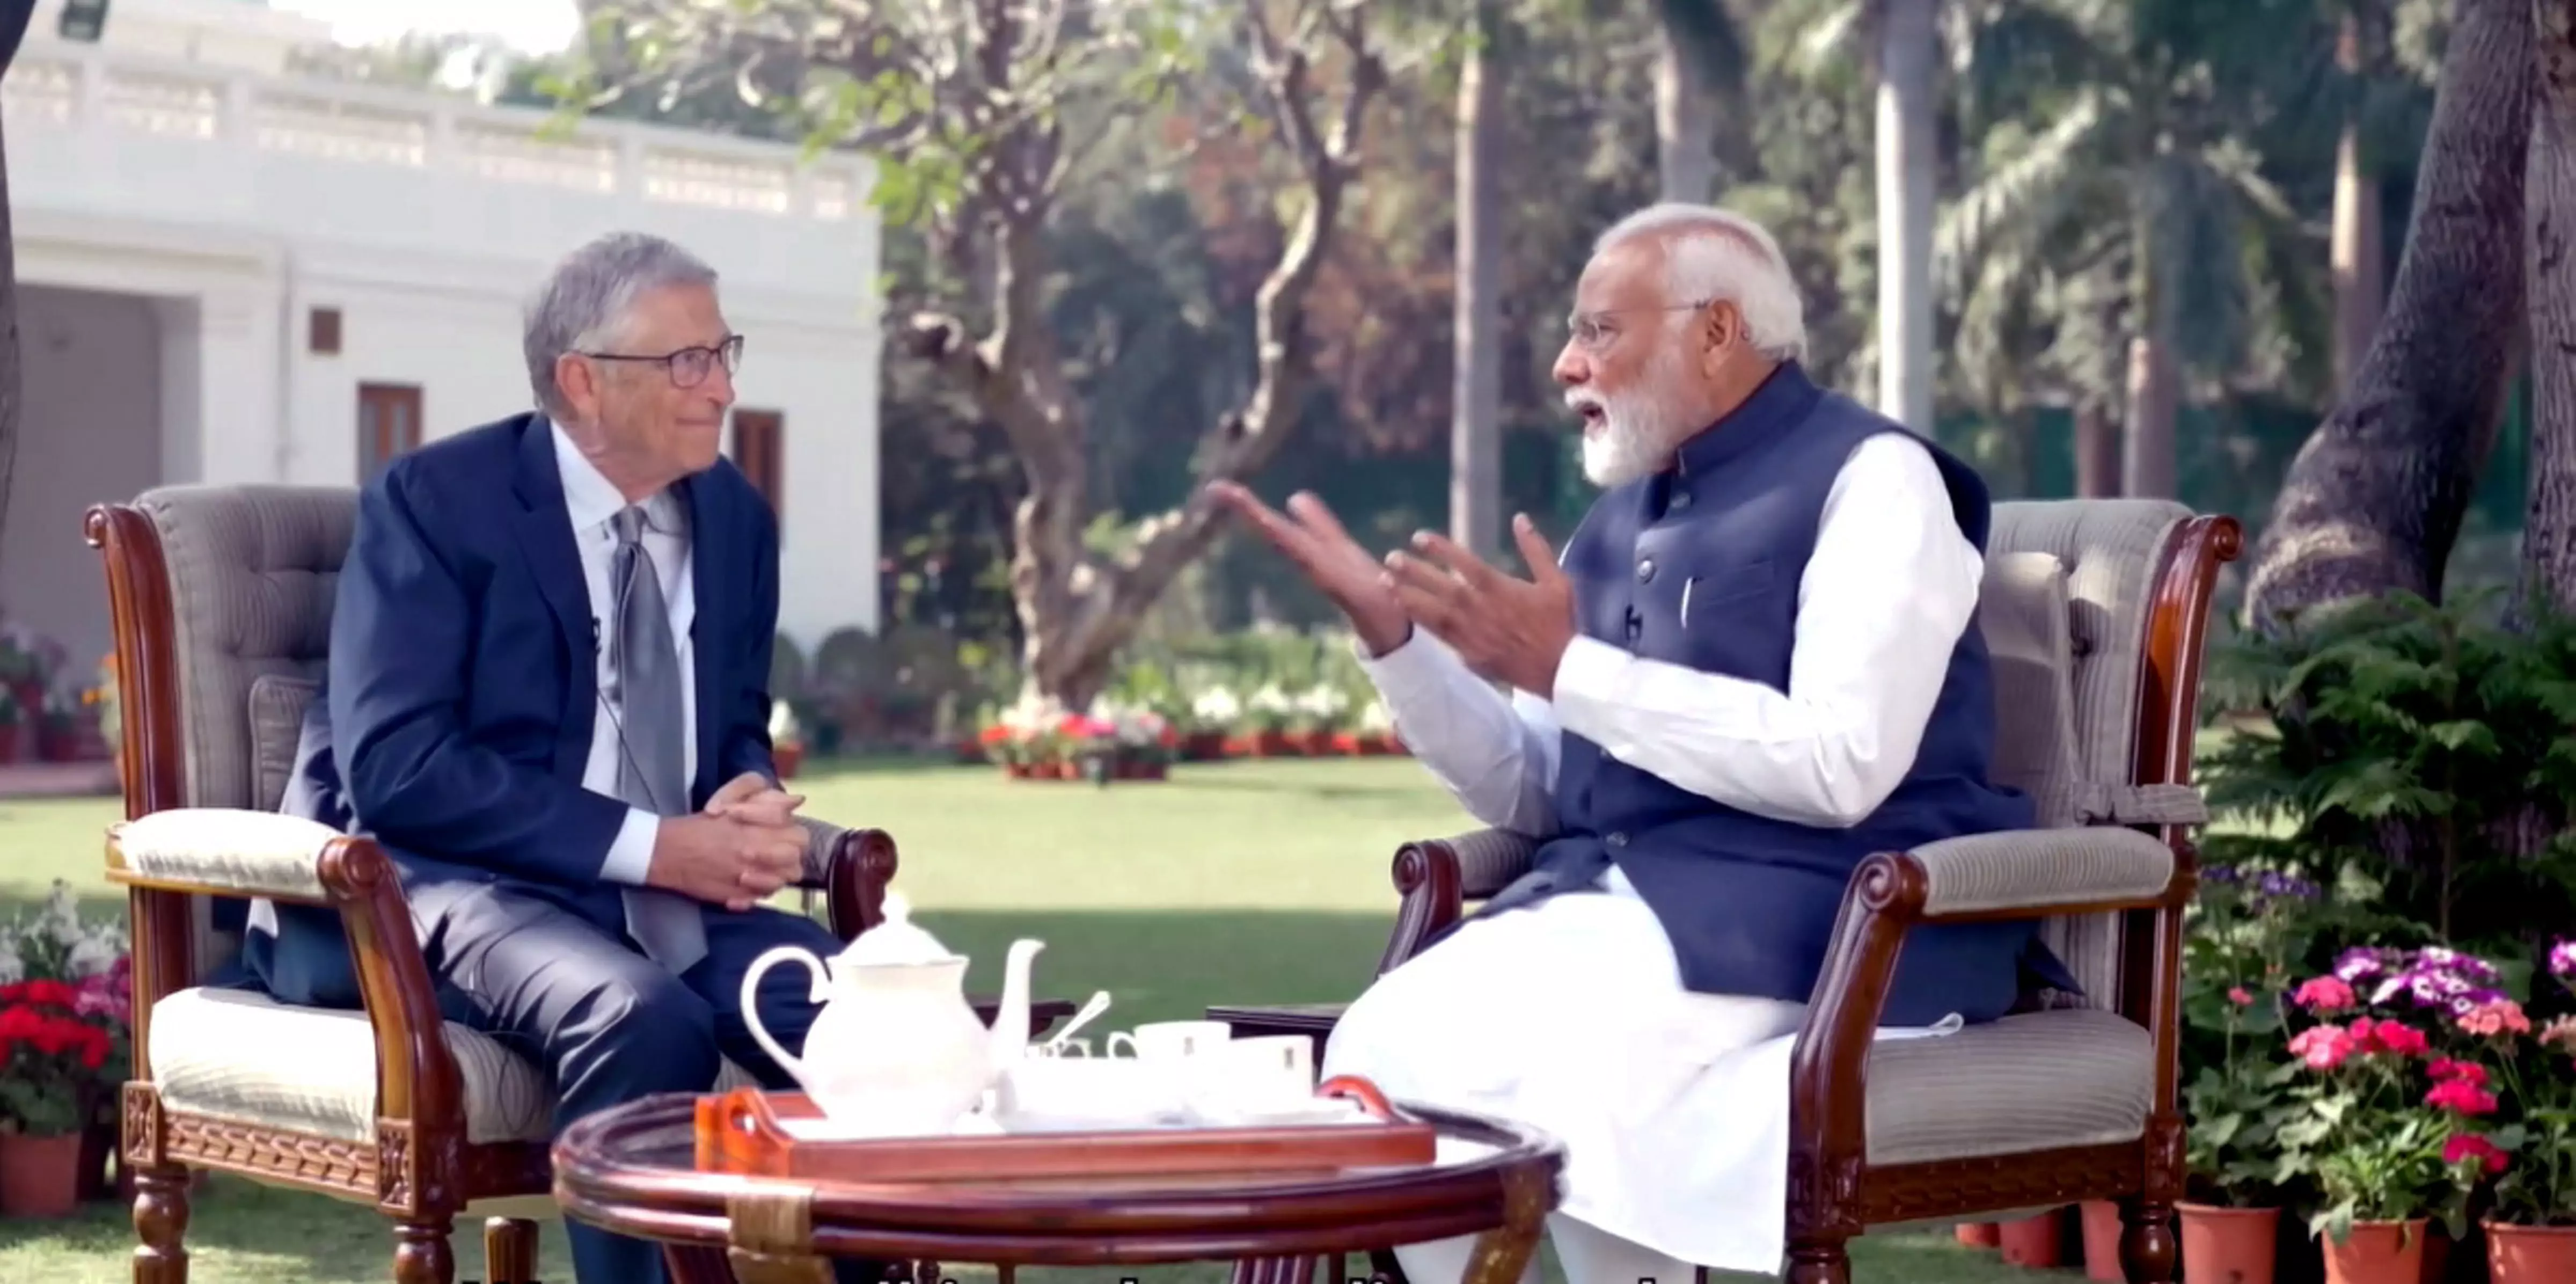 To invest in research to safeguard India’s daughters my next govt’s priority: PM Modi to Bill Gates